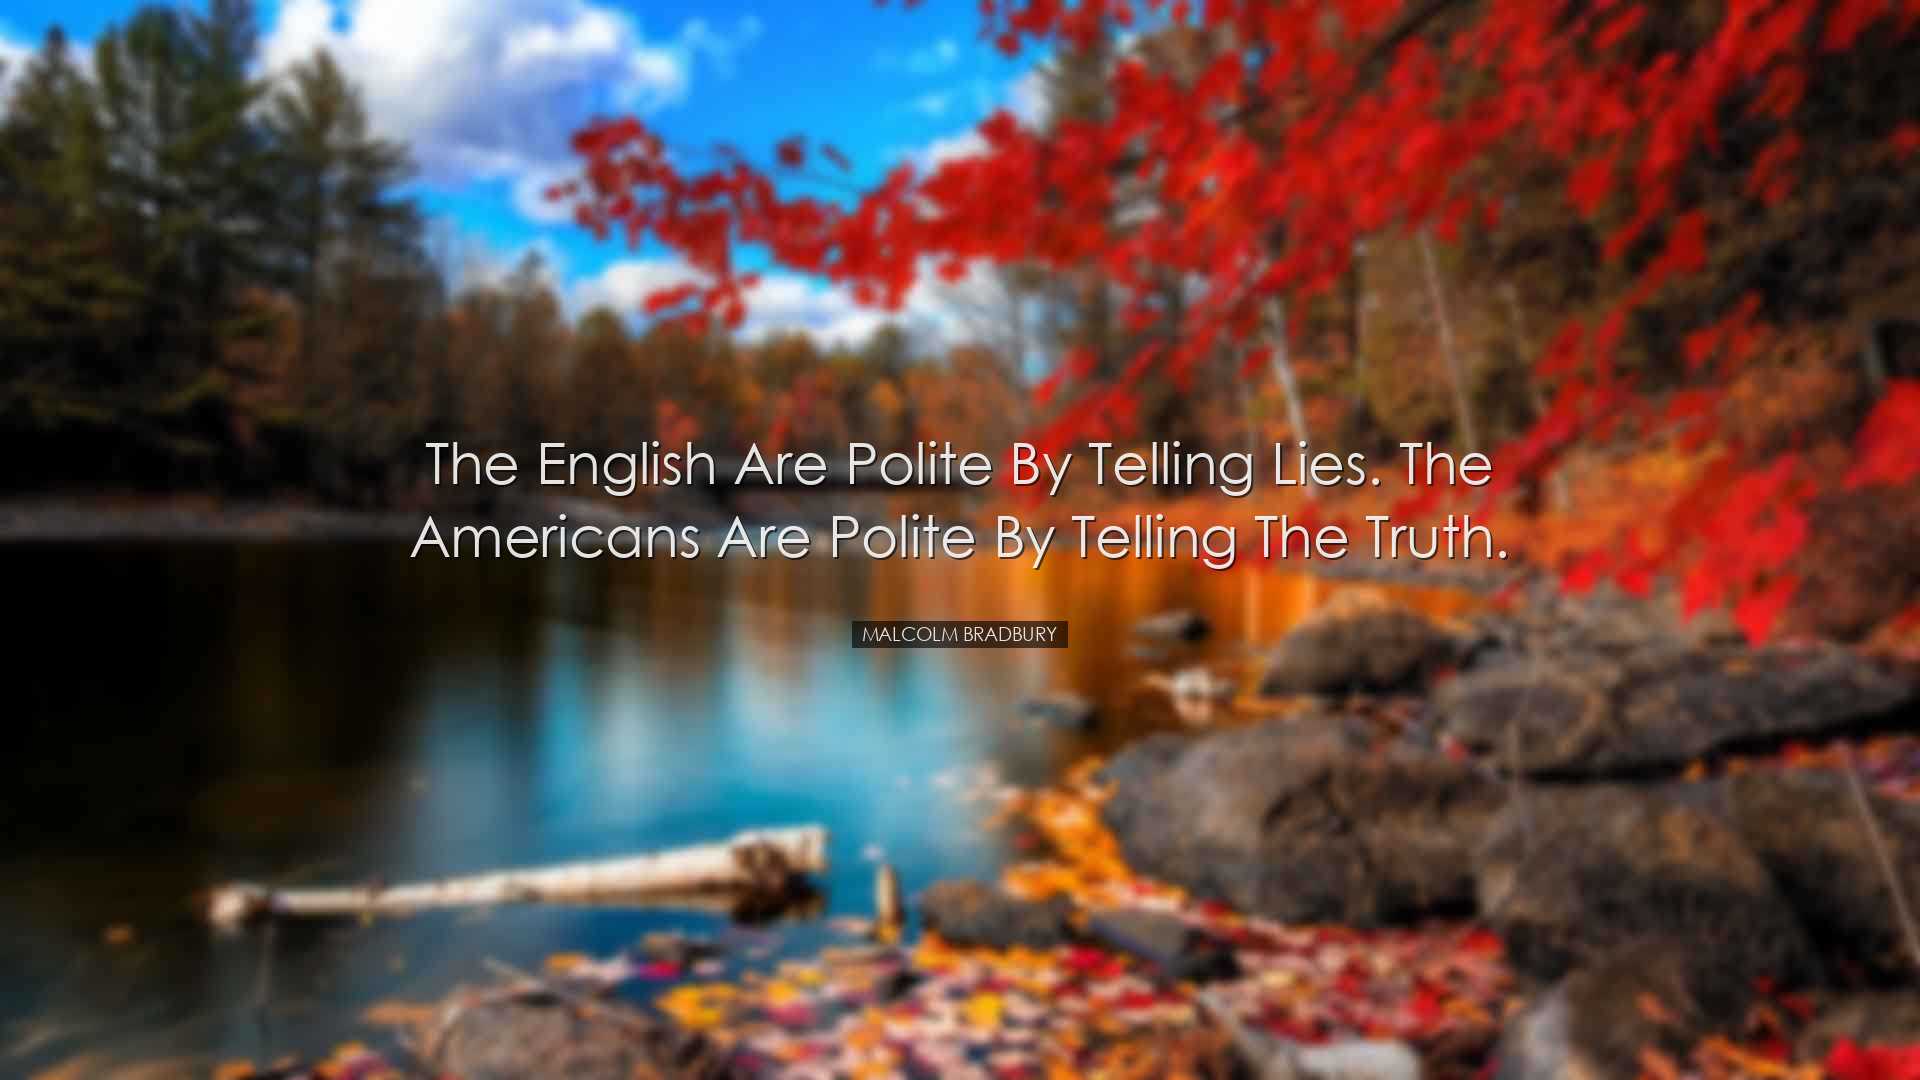 The English are polite by telling lies. The Americans are polite b